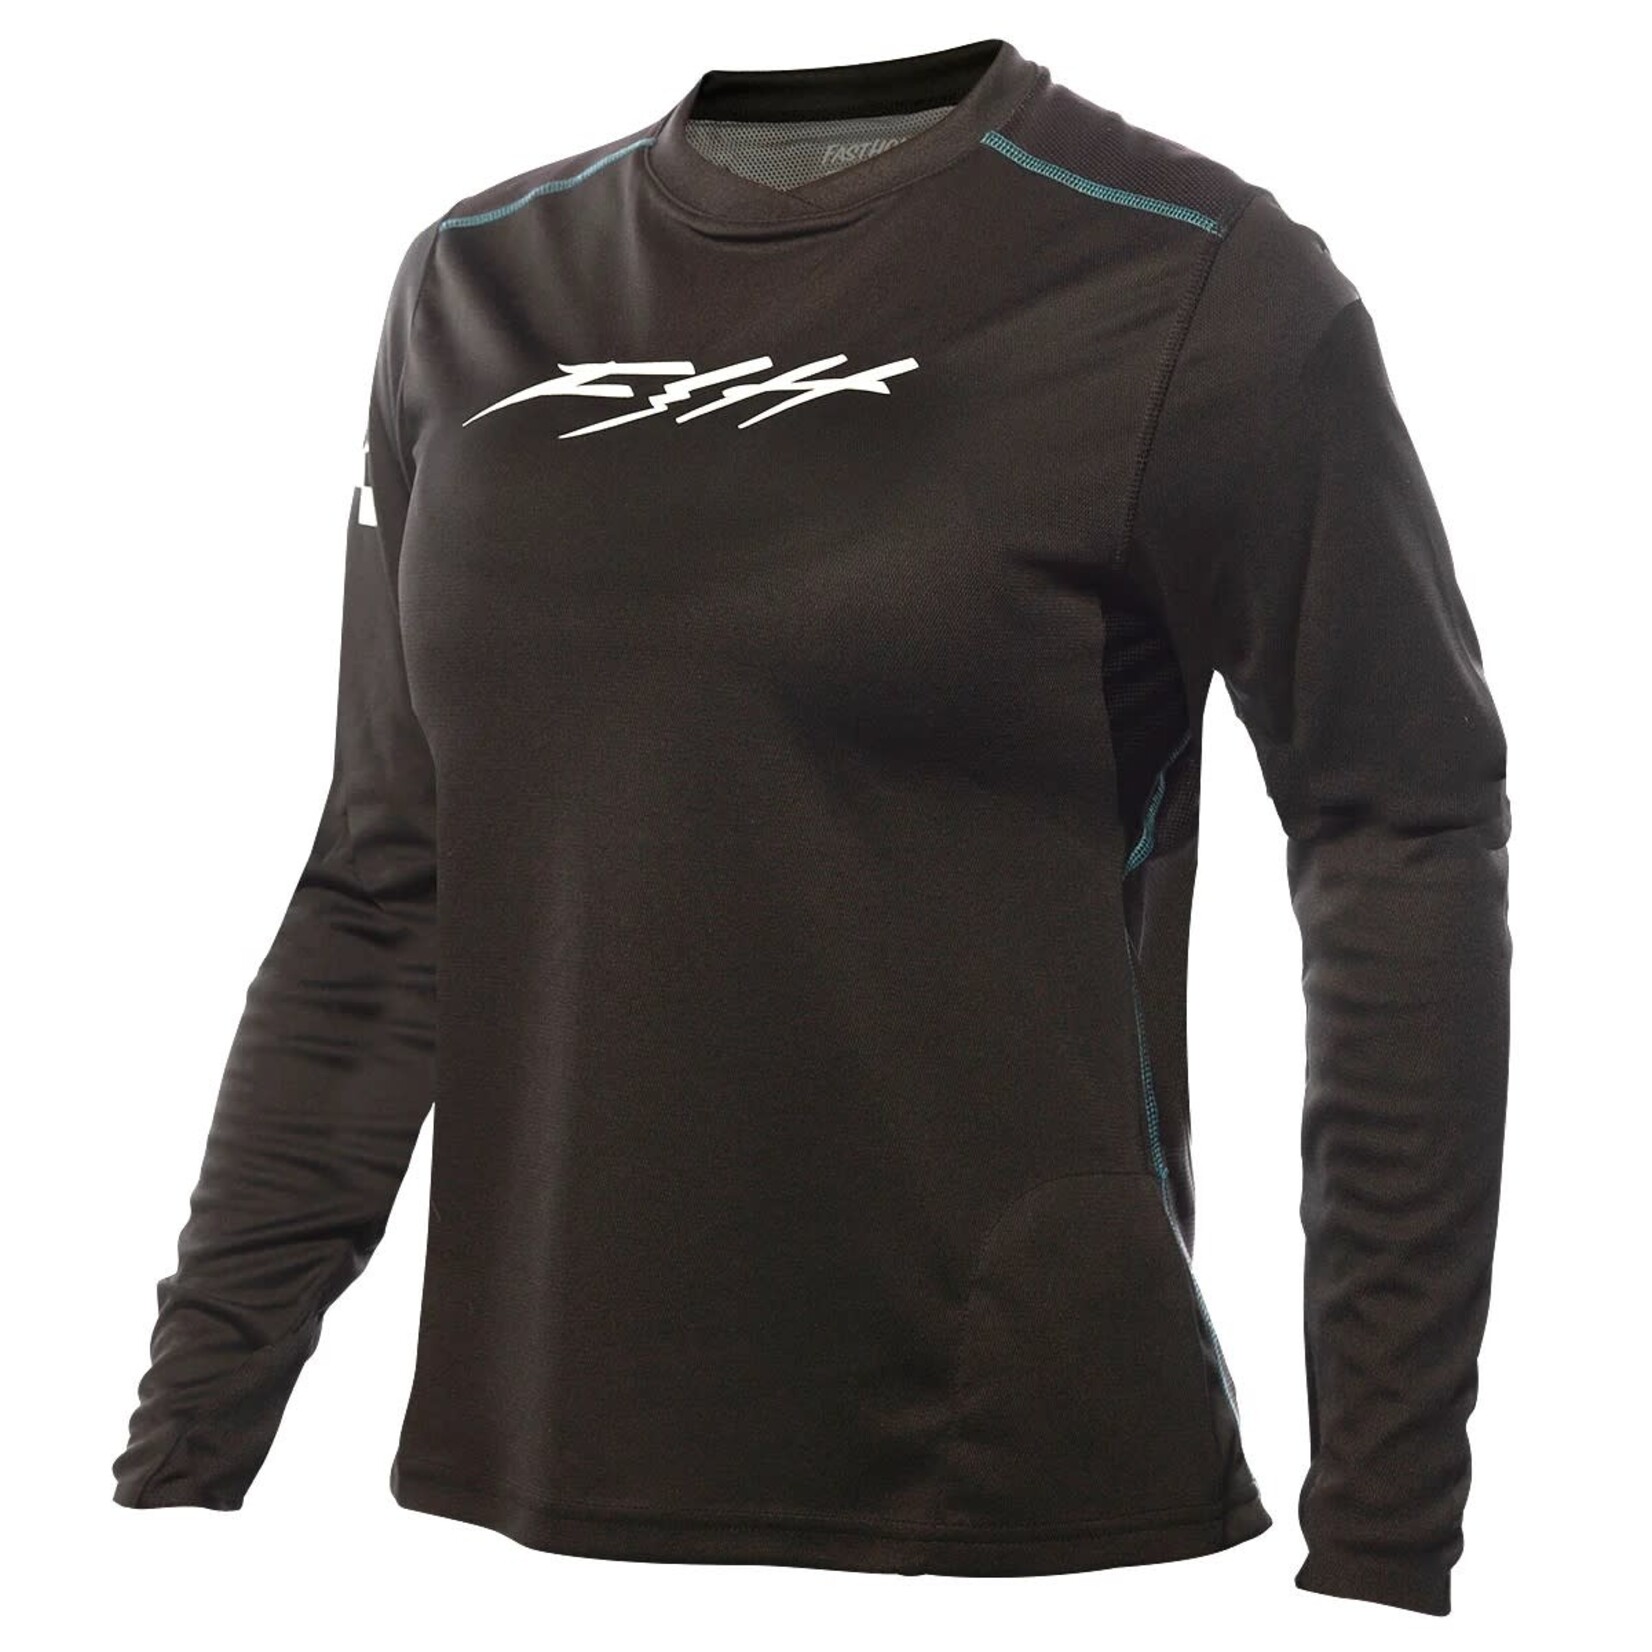 Fasthouse Fasthouse W's Ronin Alloy L/S Jersey Black